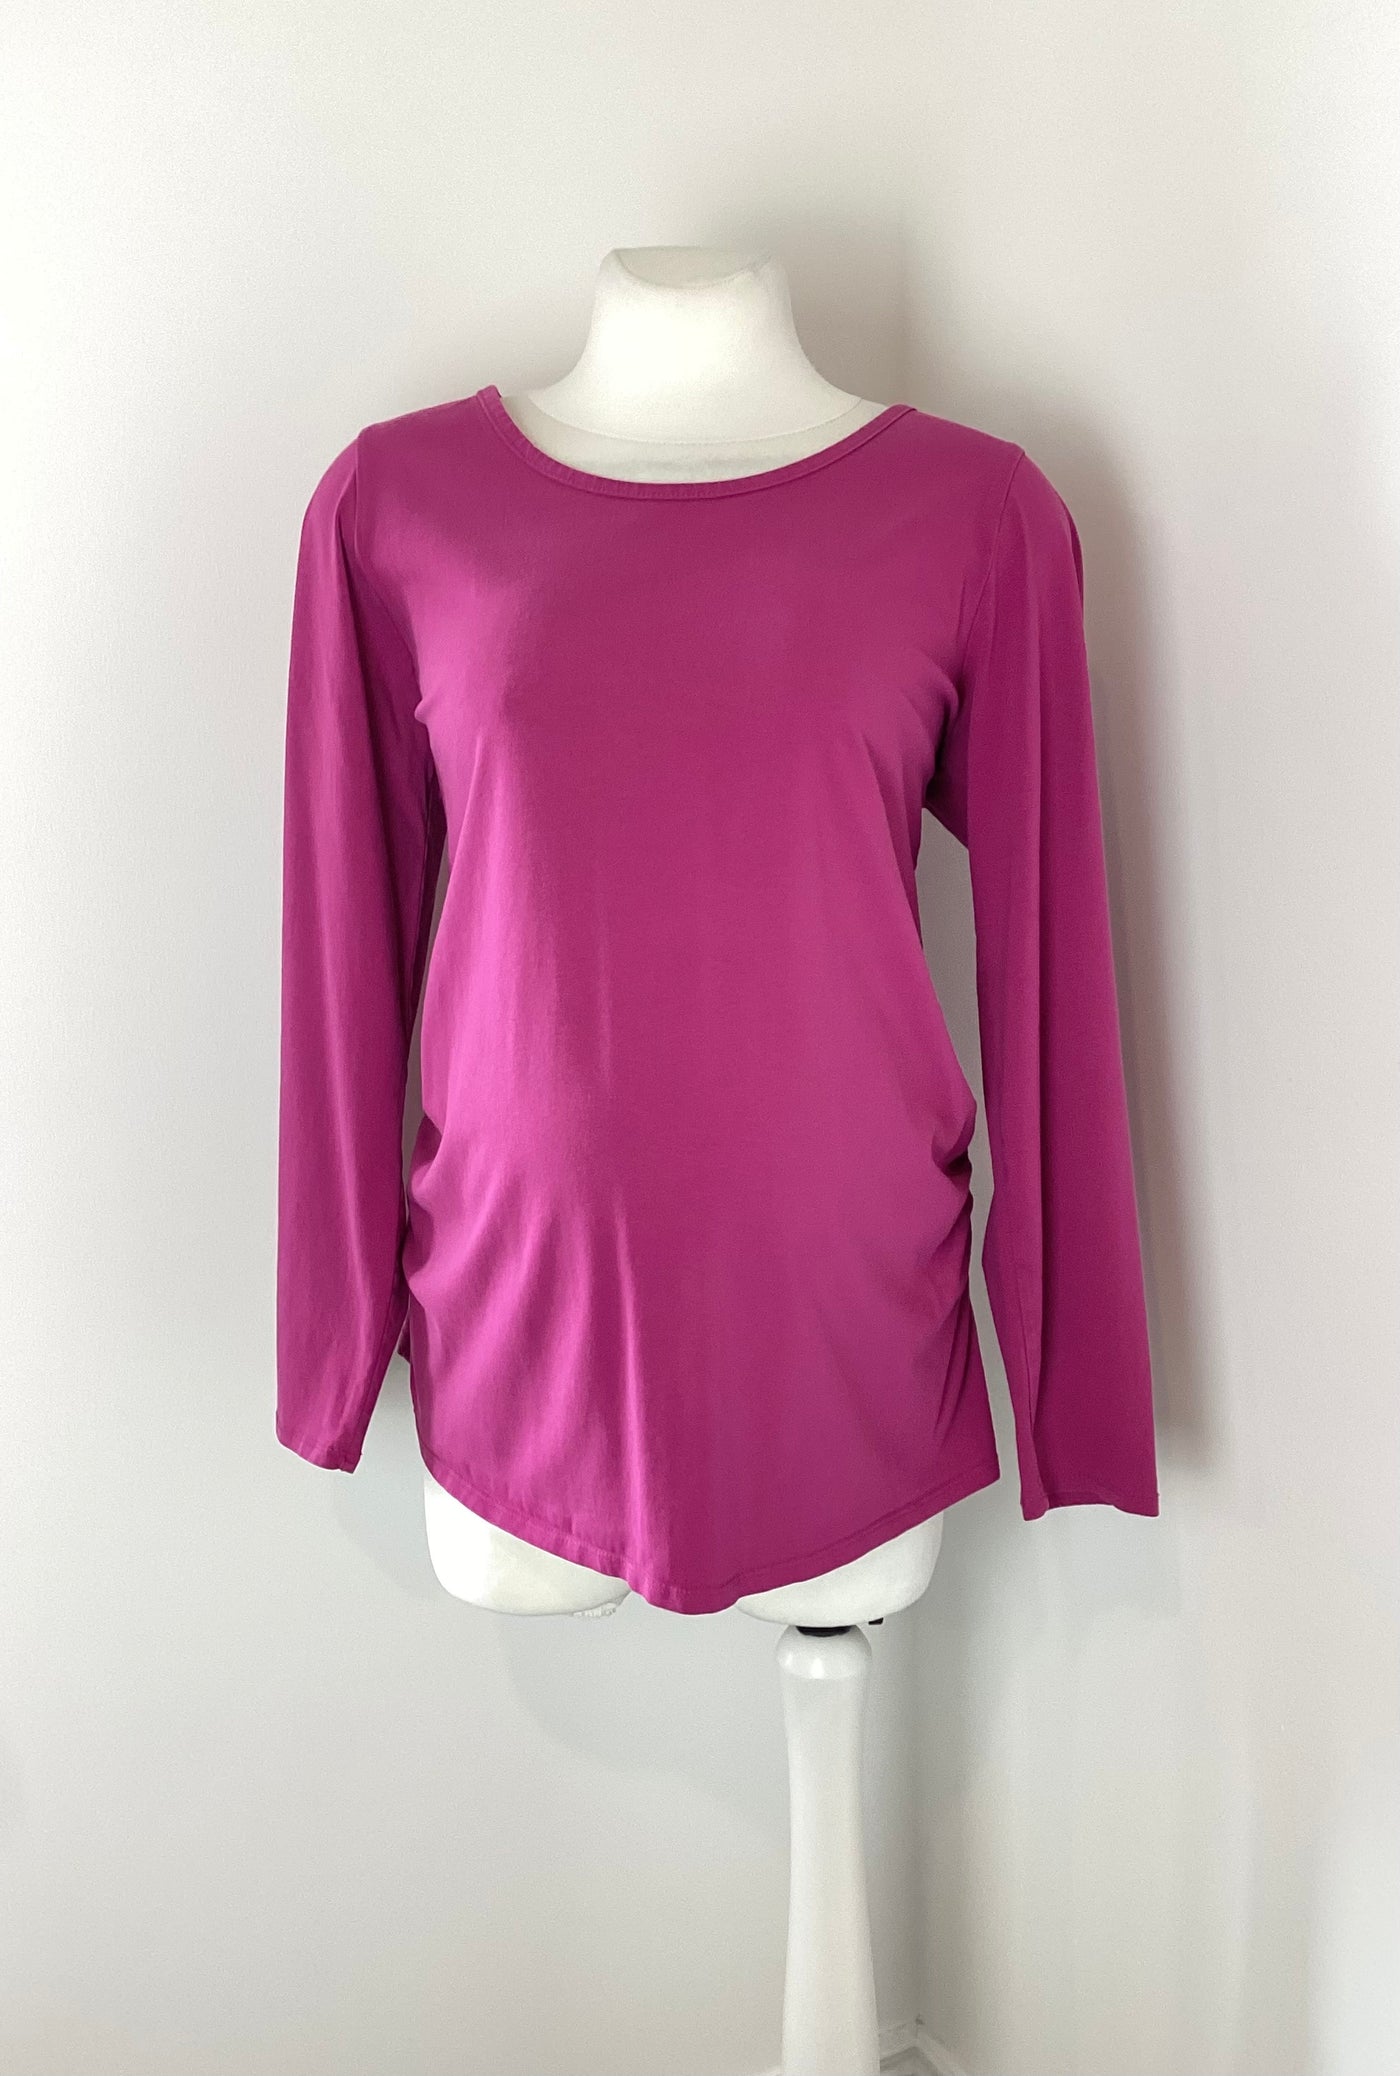 George Maternity cerise pink long sleeved top - Size 18